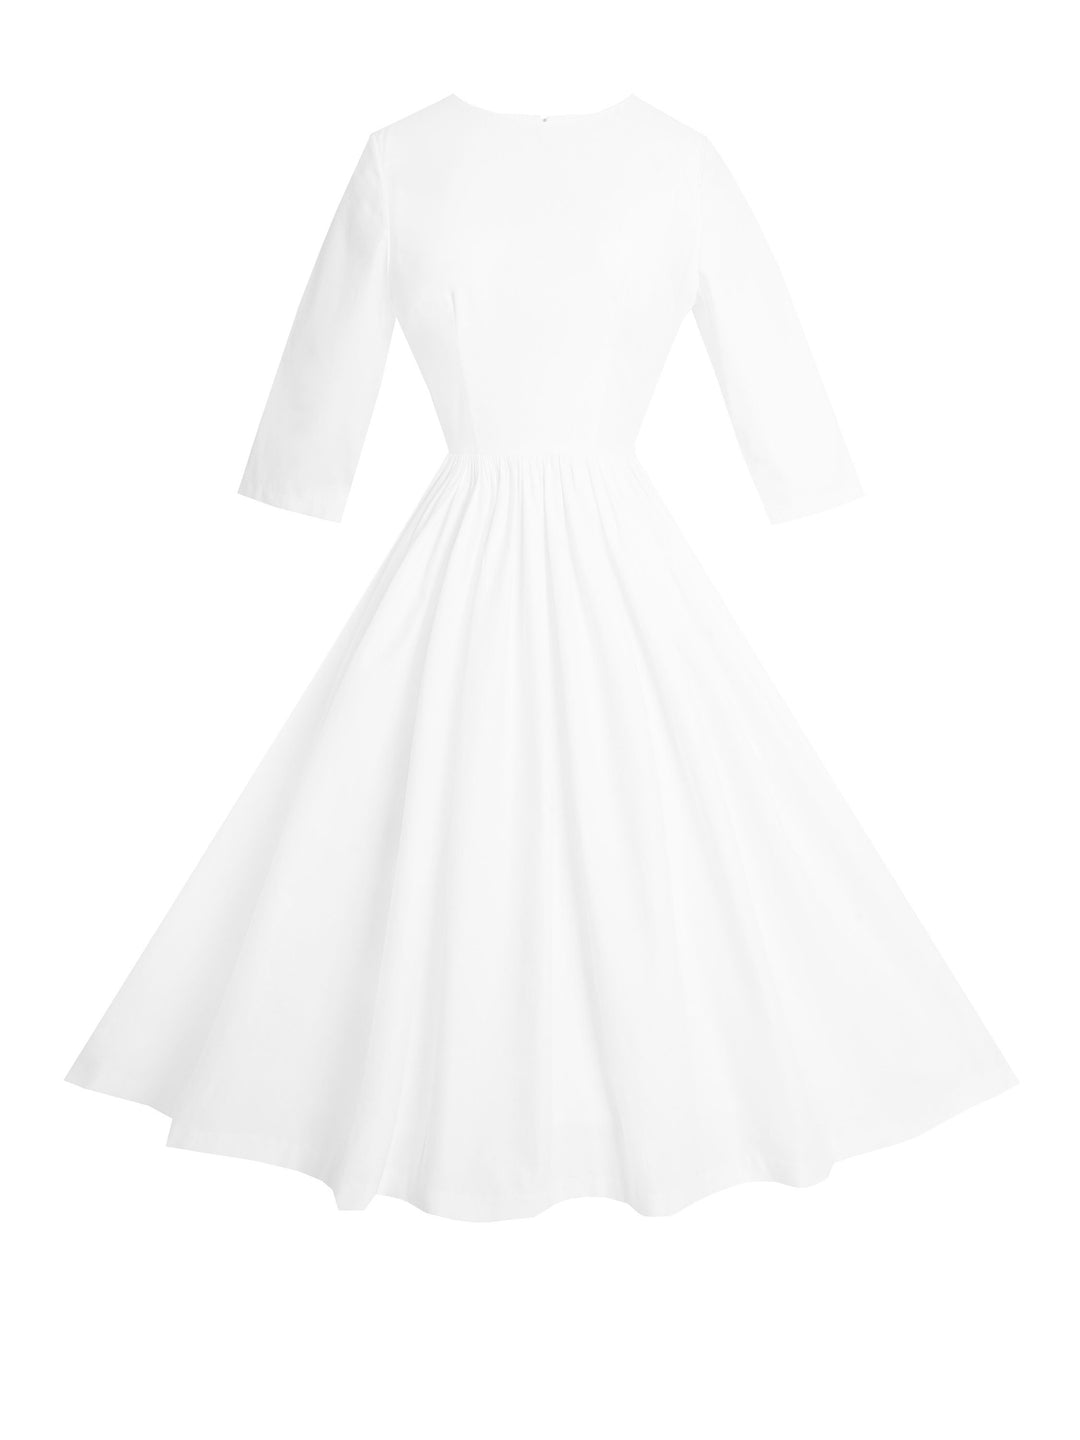 RTS - Size S - Marianne Dress in White Cotton